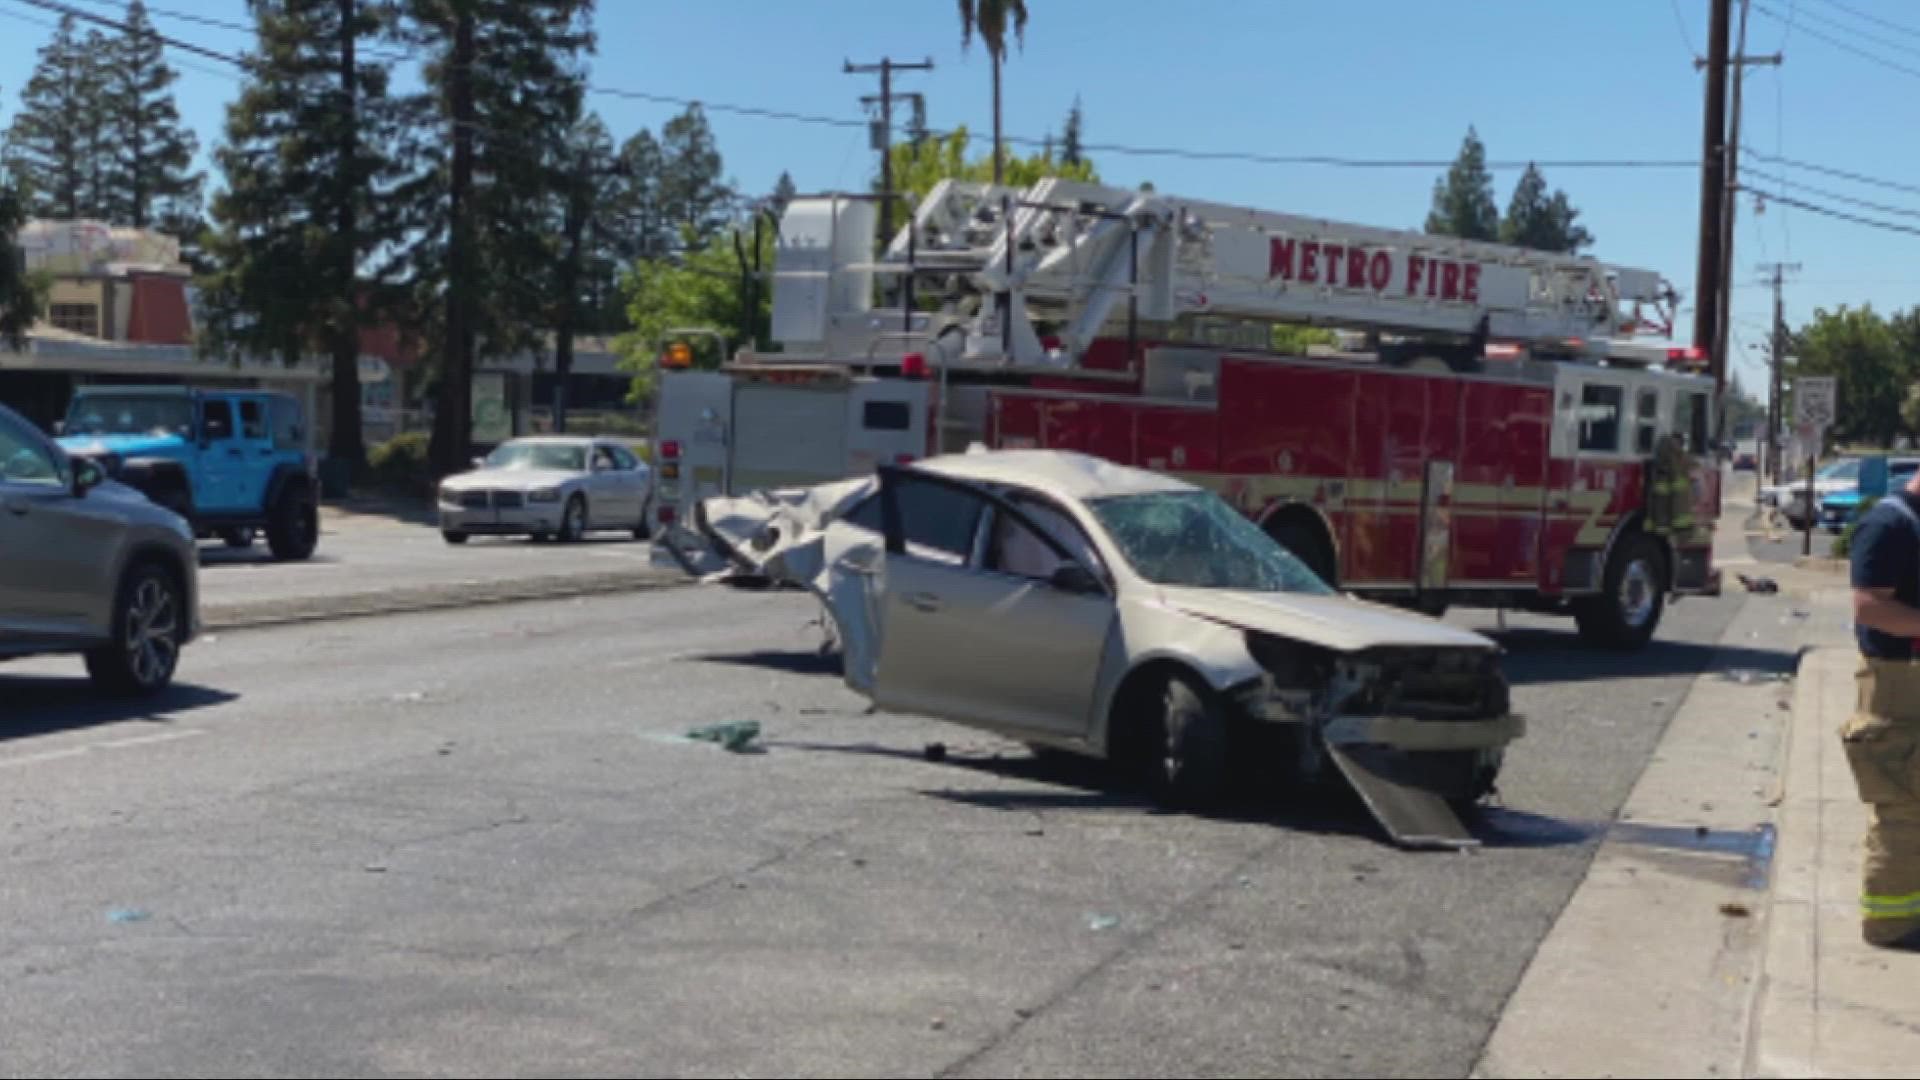 The driver of the vehicle was taken to the hospital with injuries after a high speed accident split the car in half on Arden Way and Morse Avenue.